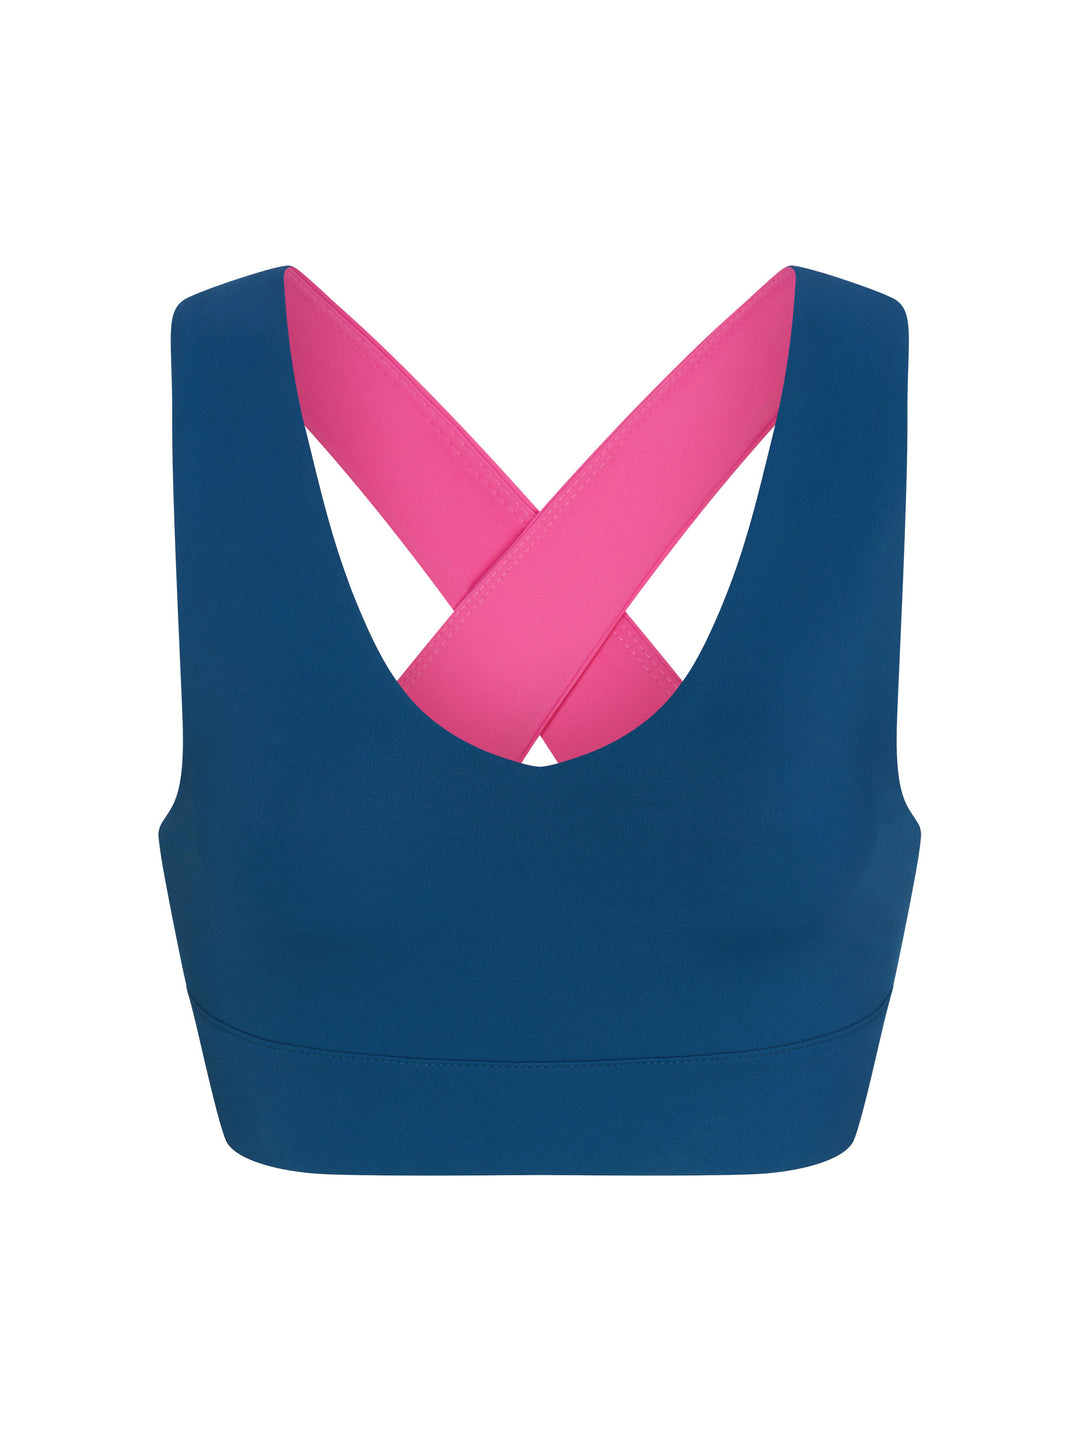 X-Over Back Sports Bra front view in astral blue and pink.